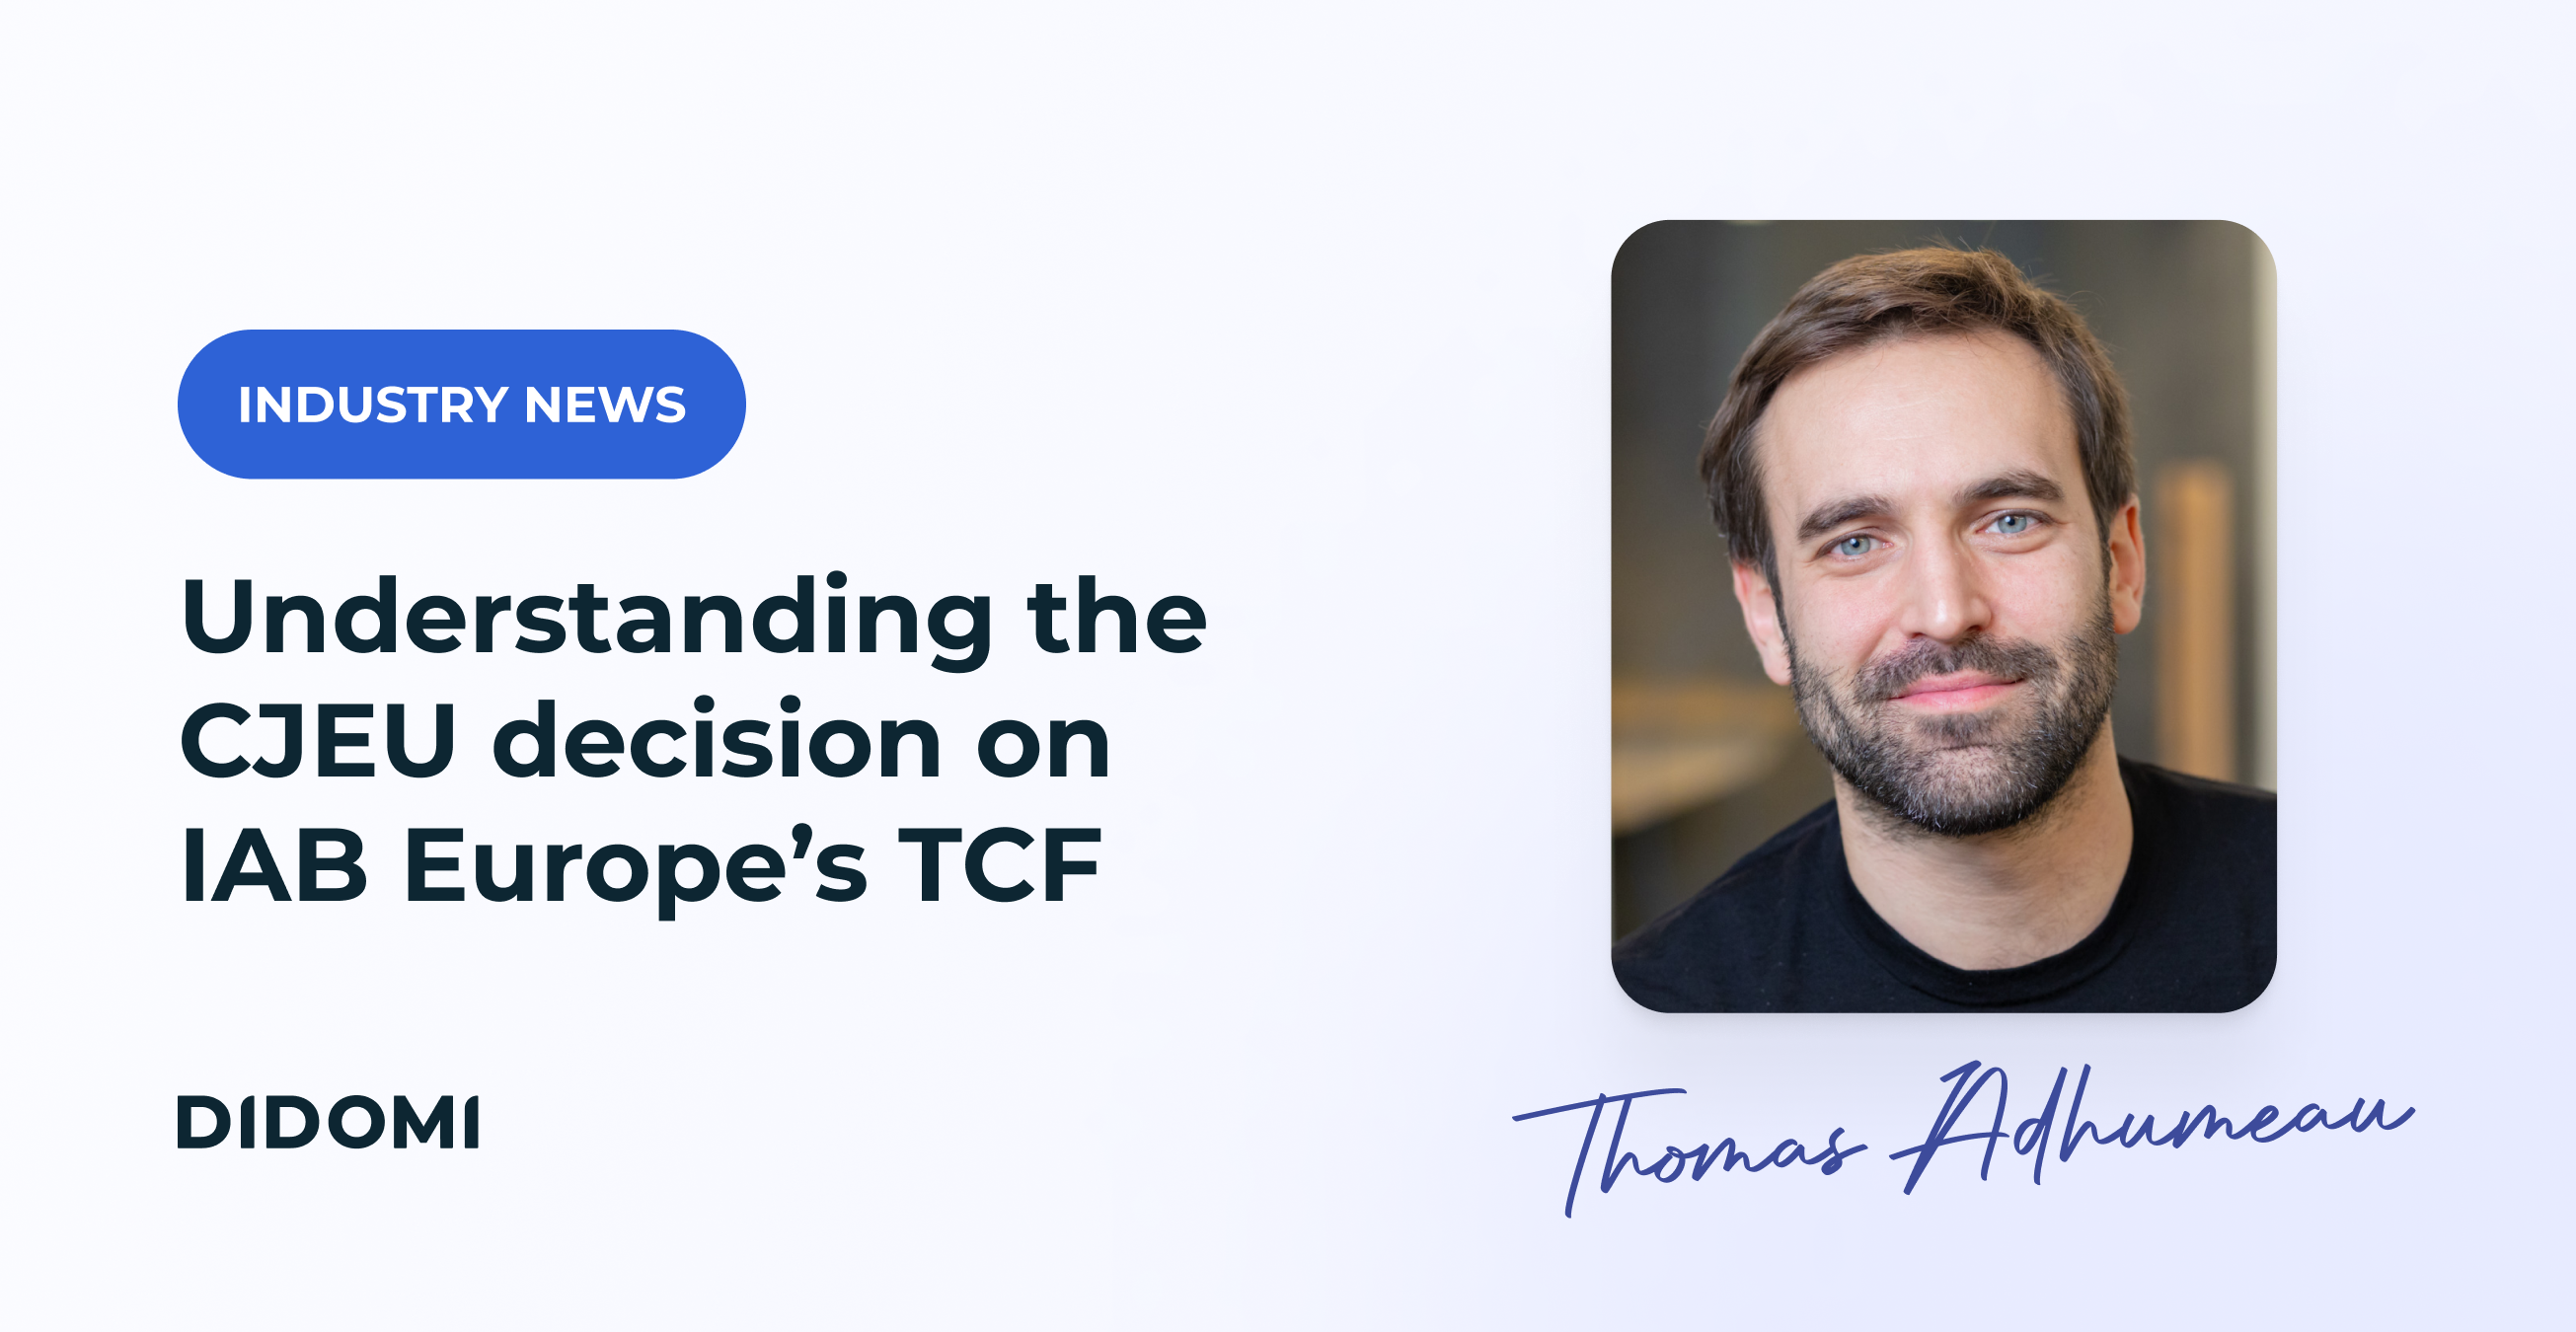 A picture of Thomas Adhumeau, Didomi's CPO, with the title "Understanding the CJEU decision on IAB Europe’s TCF " and the label "Industry news"